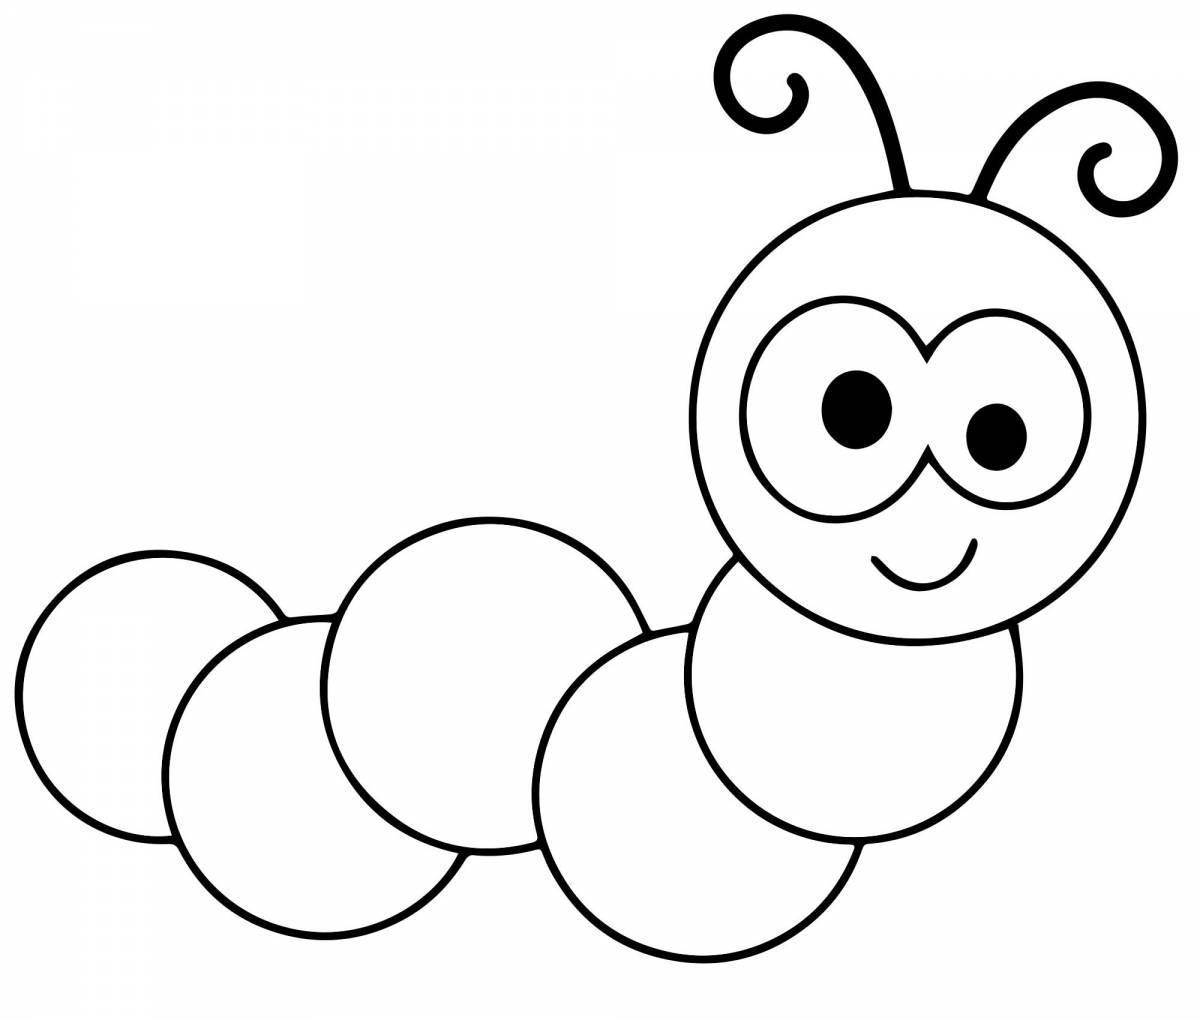 Glitter caterpillar coloring page